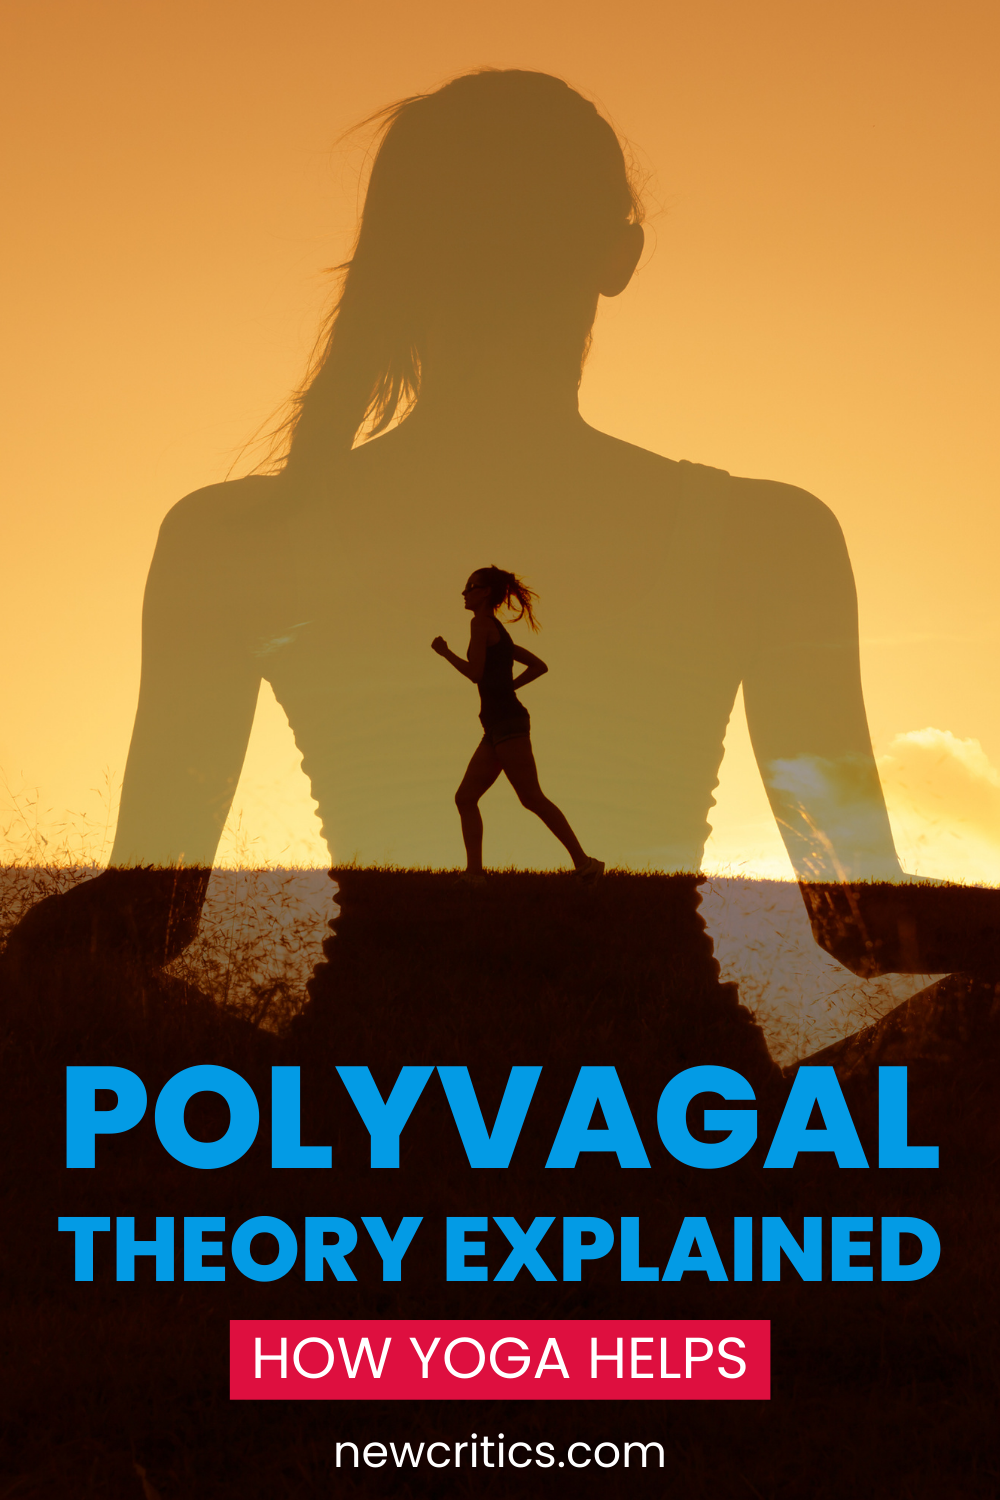 Polyvagal Therory Explained / Canva